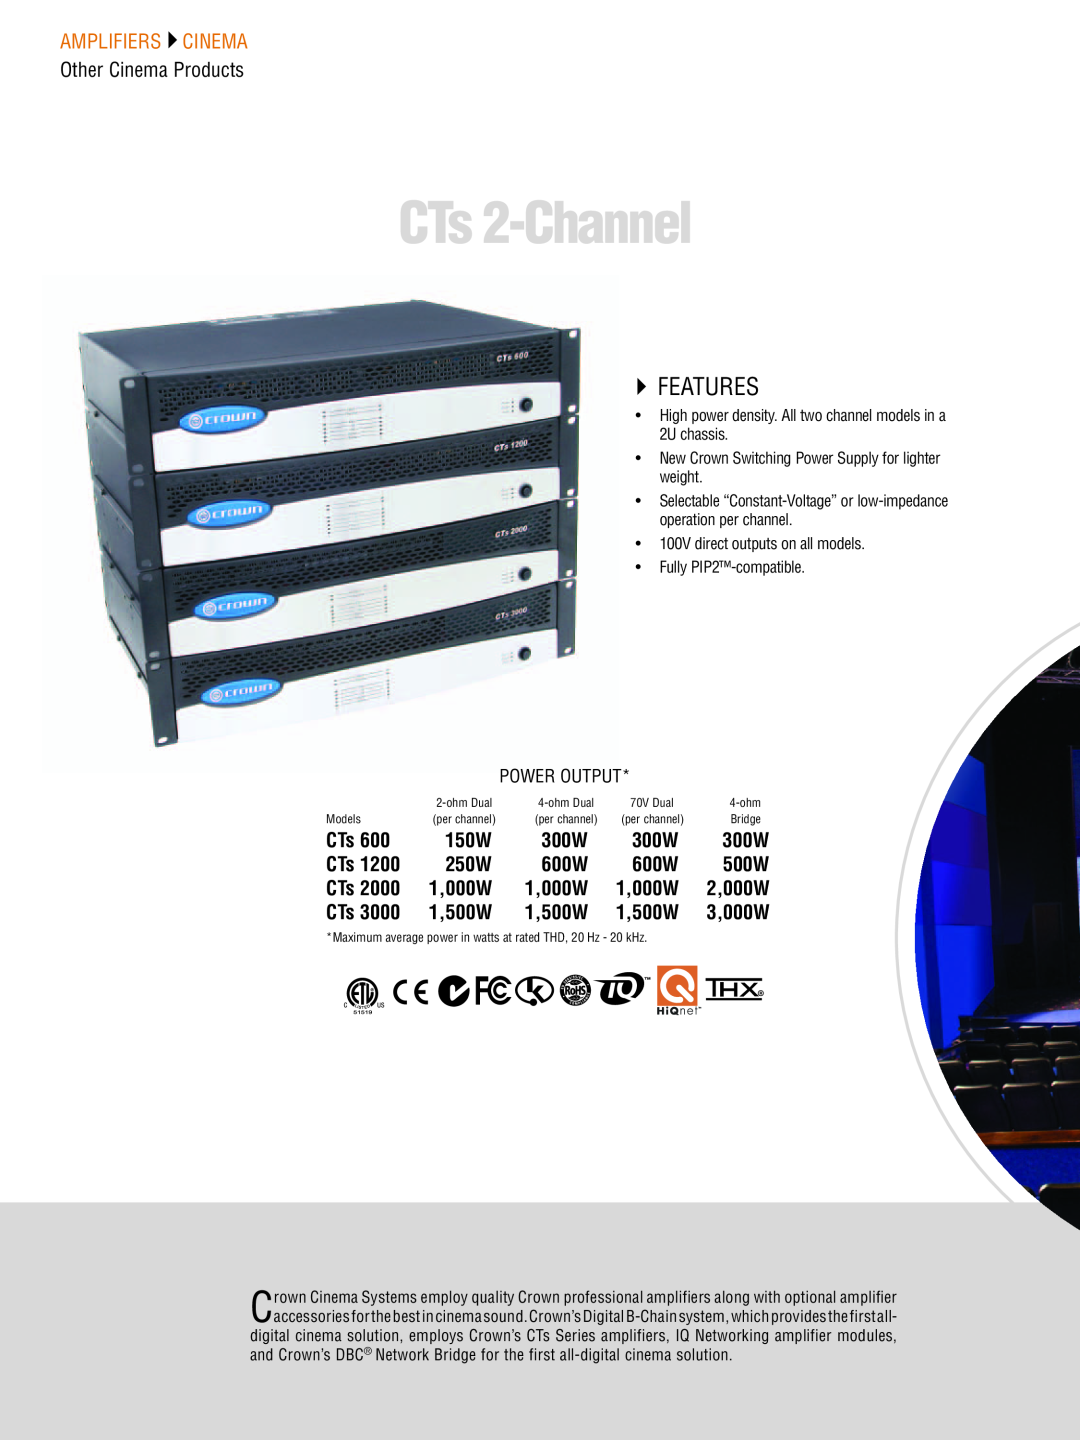 Crown CTS 1200, CTS 3000, CTS 2000, CTS 600 manual CTs 2-Channel, Other Cinema Products, `` Features, Amplifiers  Cinema 